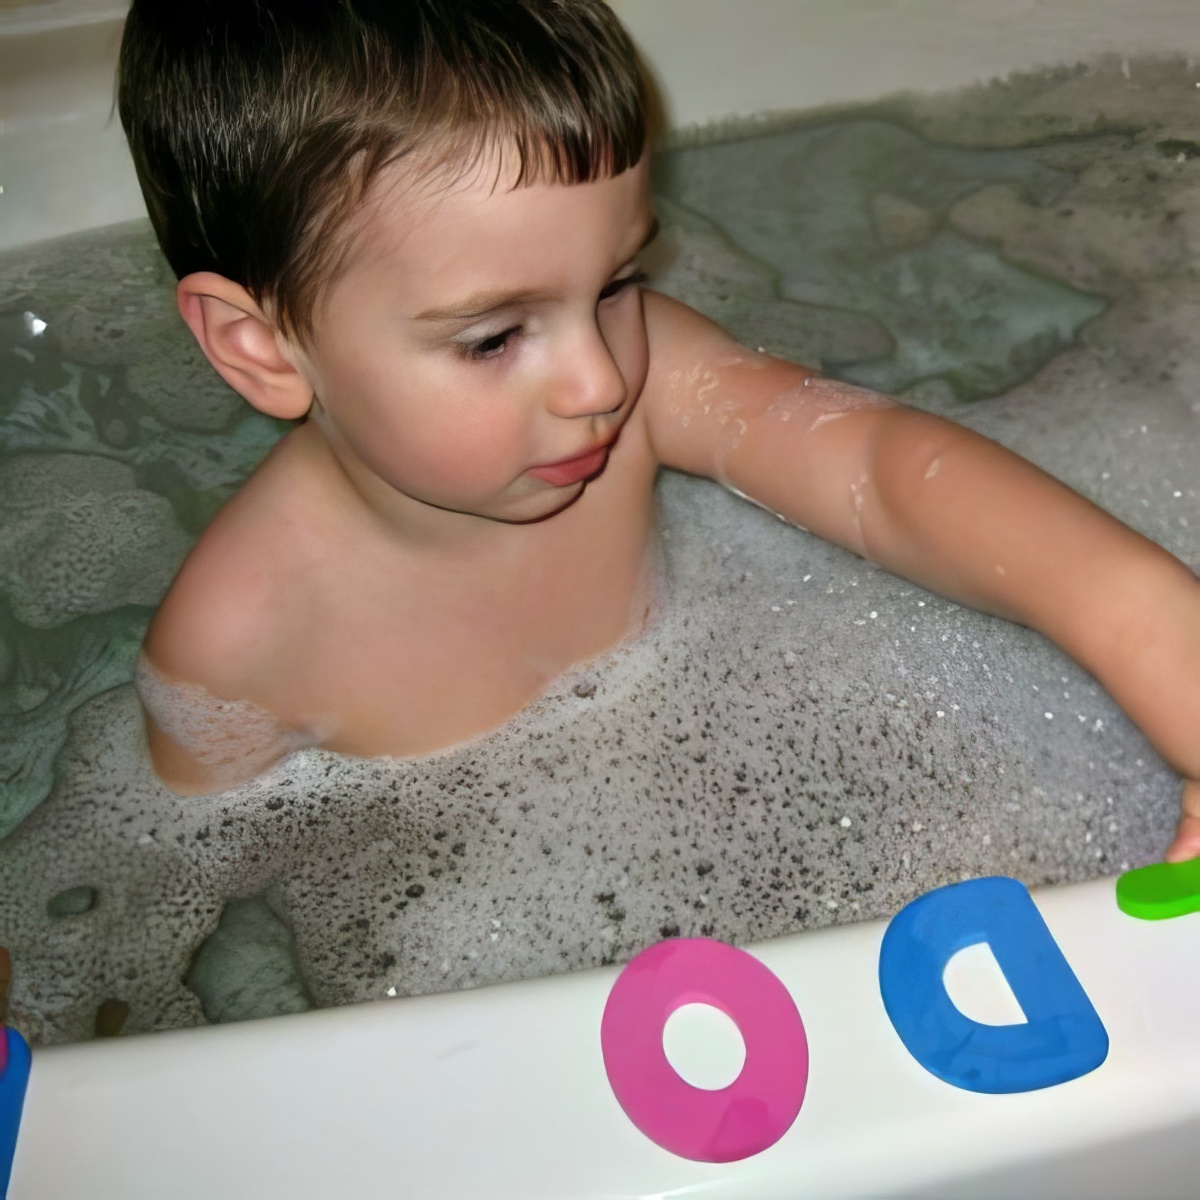 boy-in-bath-with-letters, Phonics Games and Activities for toddlers, phonics activities for your kids